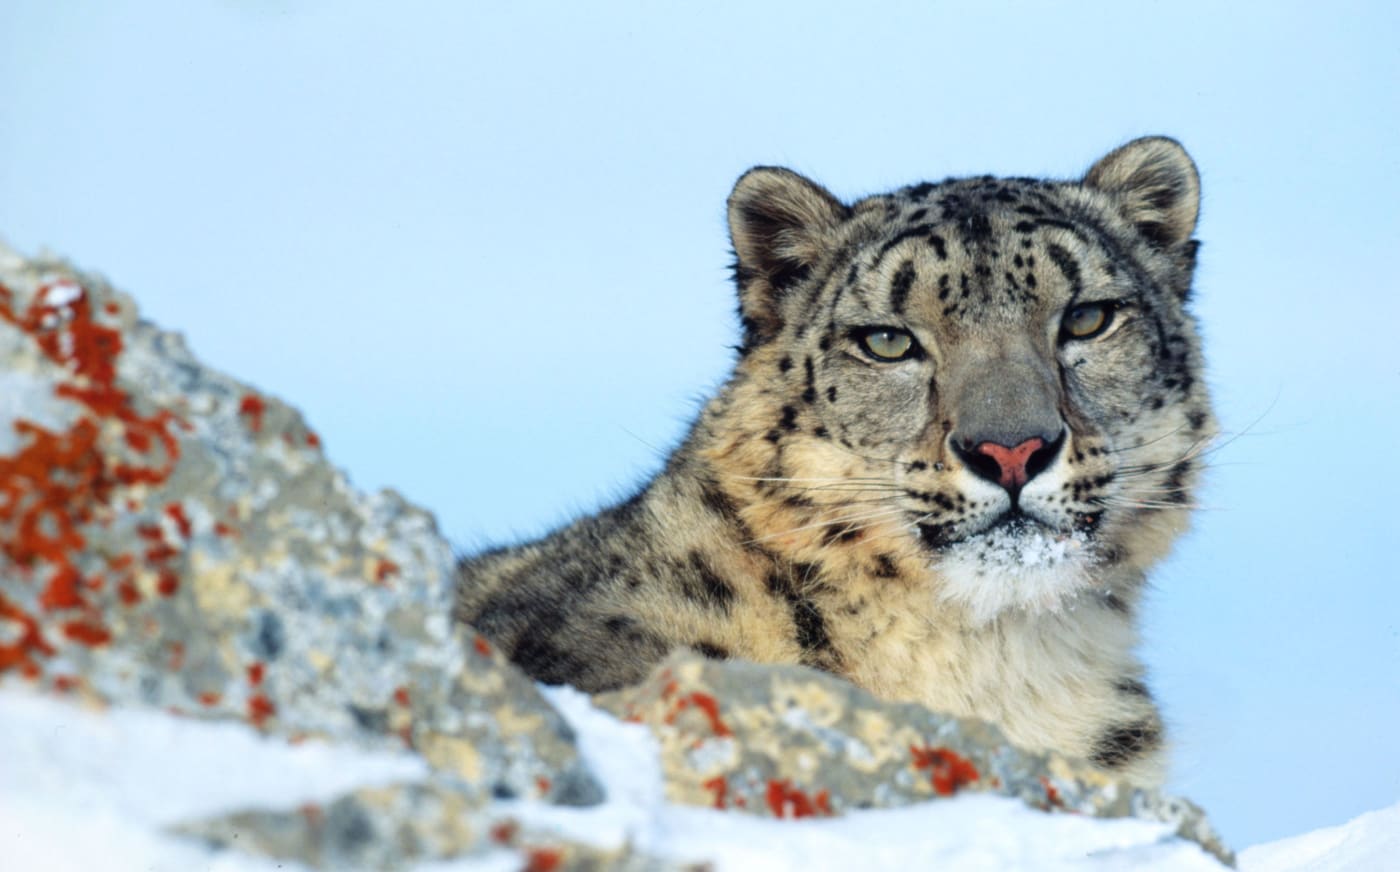 Snow leopard on rocky mountains  in winter Montana